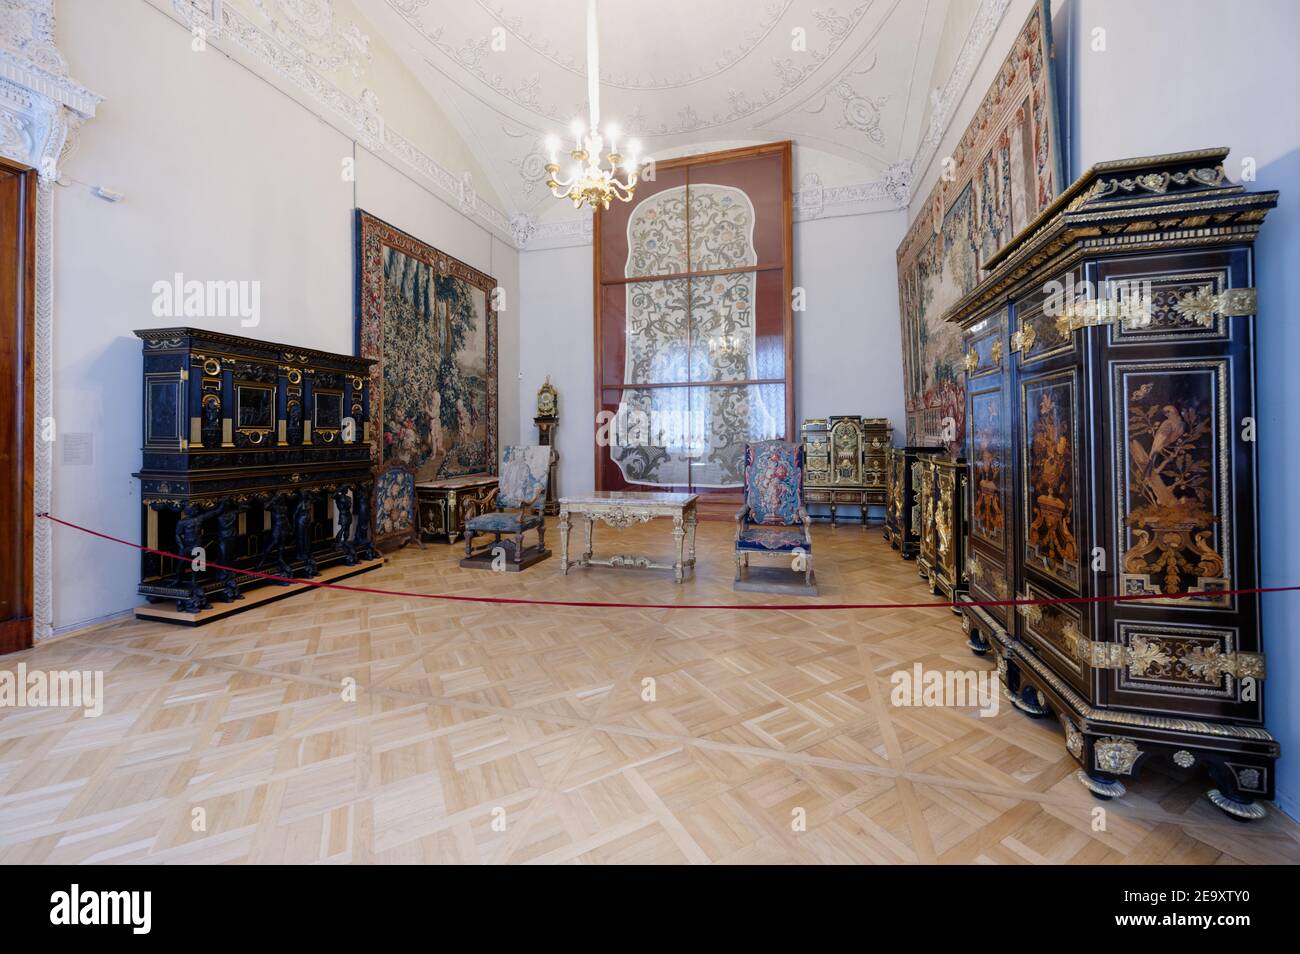 Room of 17th century French Decorative and Applied Art in the Winter Palace, the State Hermitage Museum, St. Petersburg, Russia Stock Photo